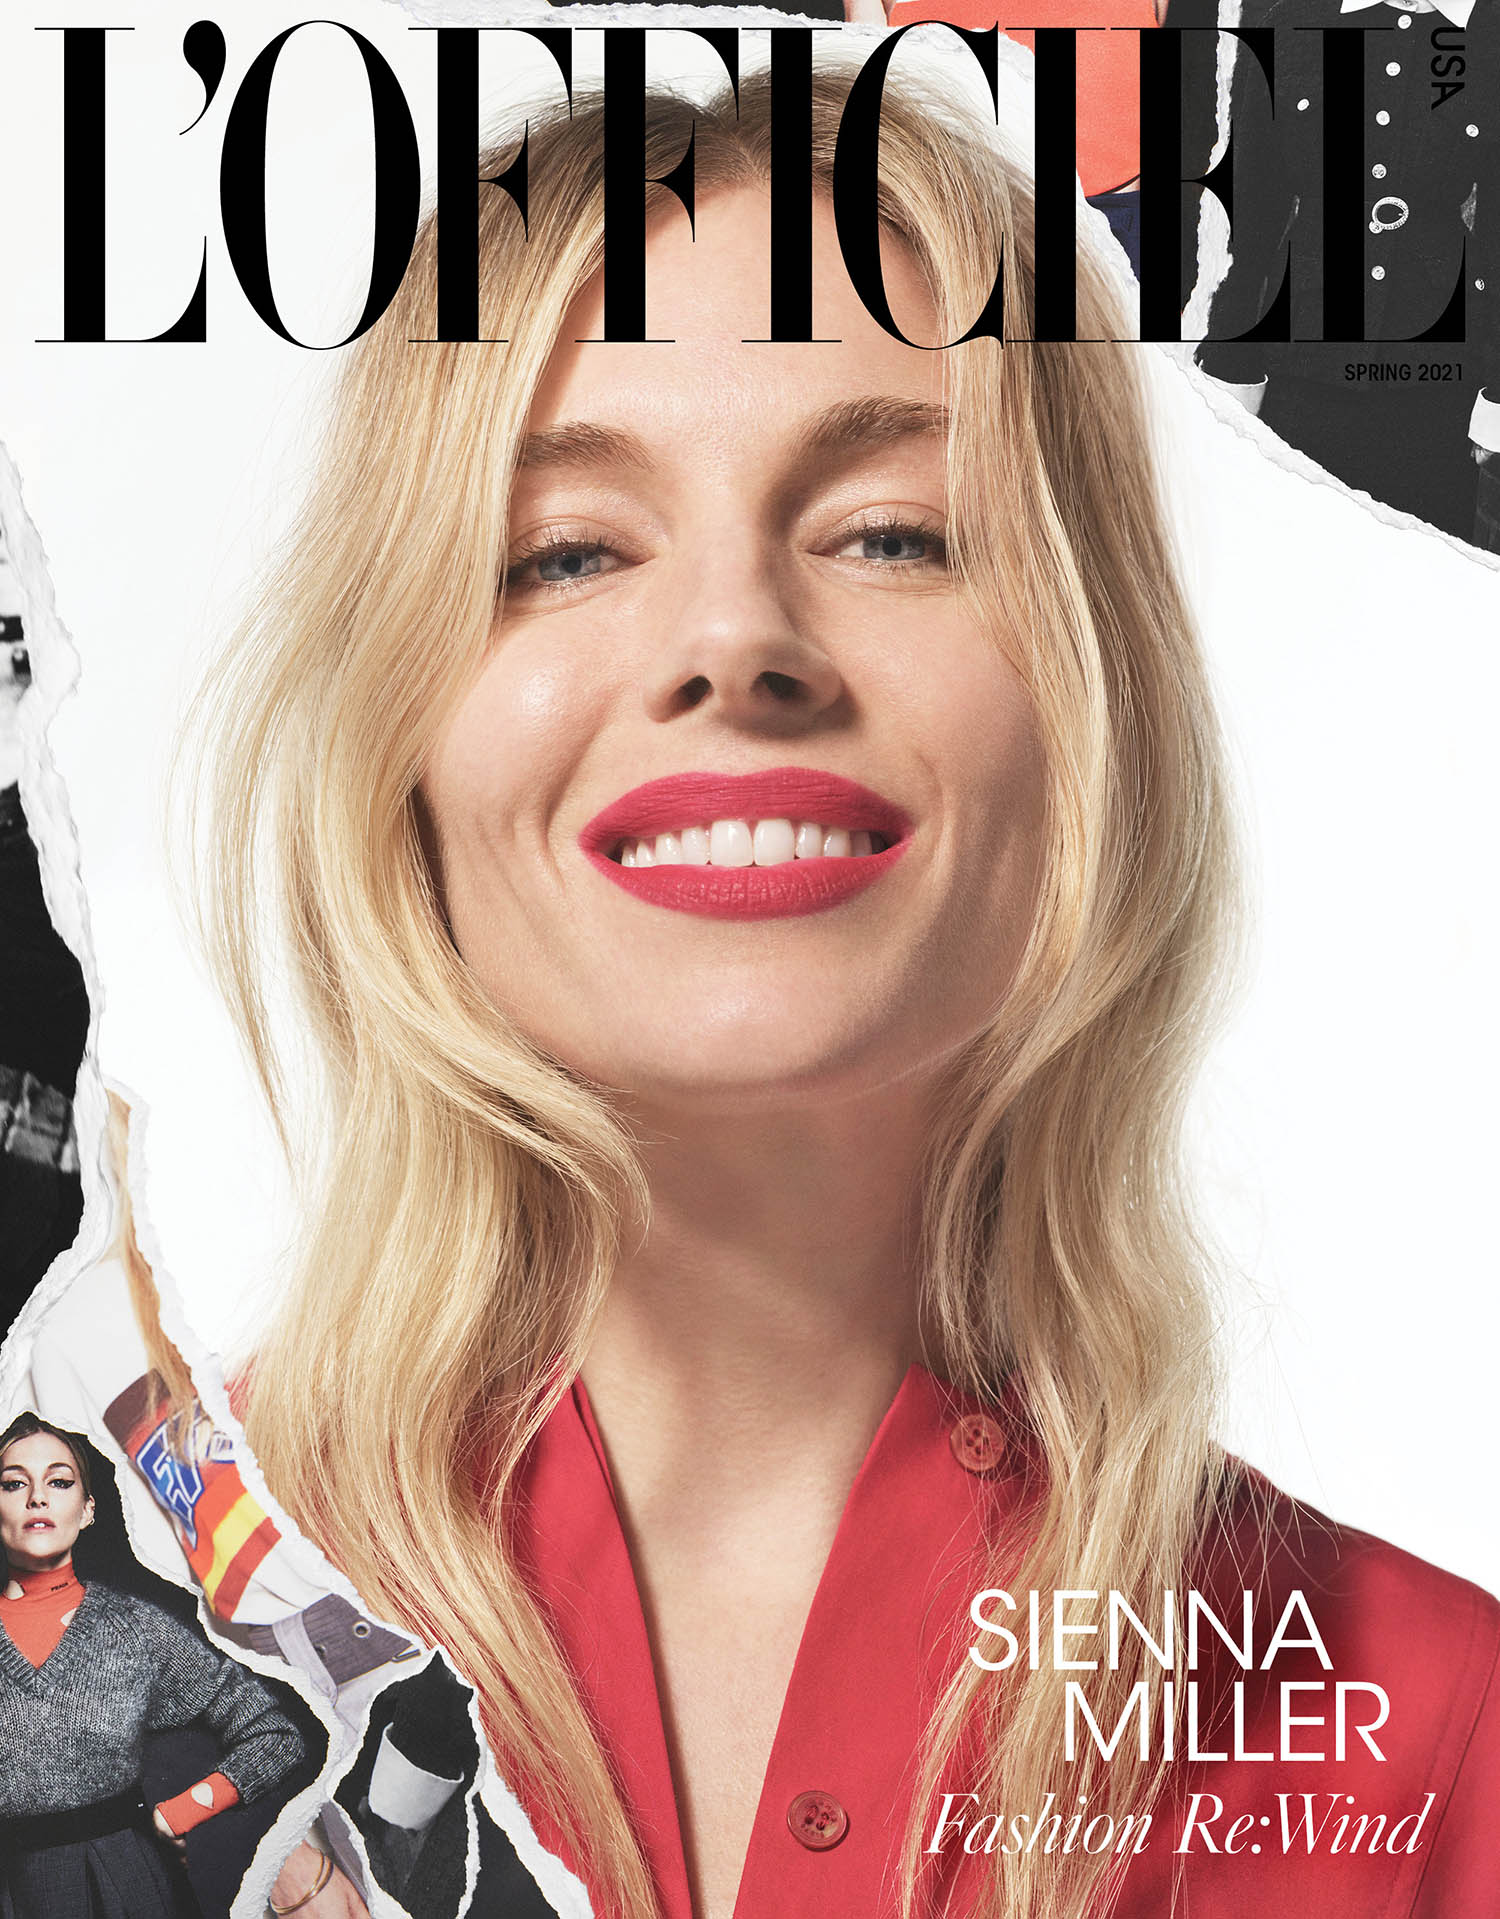 Sienna Miller covers L’Officiel USA Spring 2021 by Tom Munro